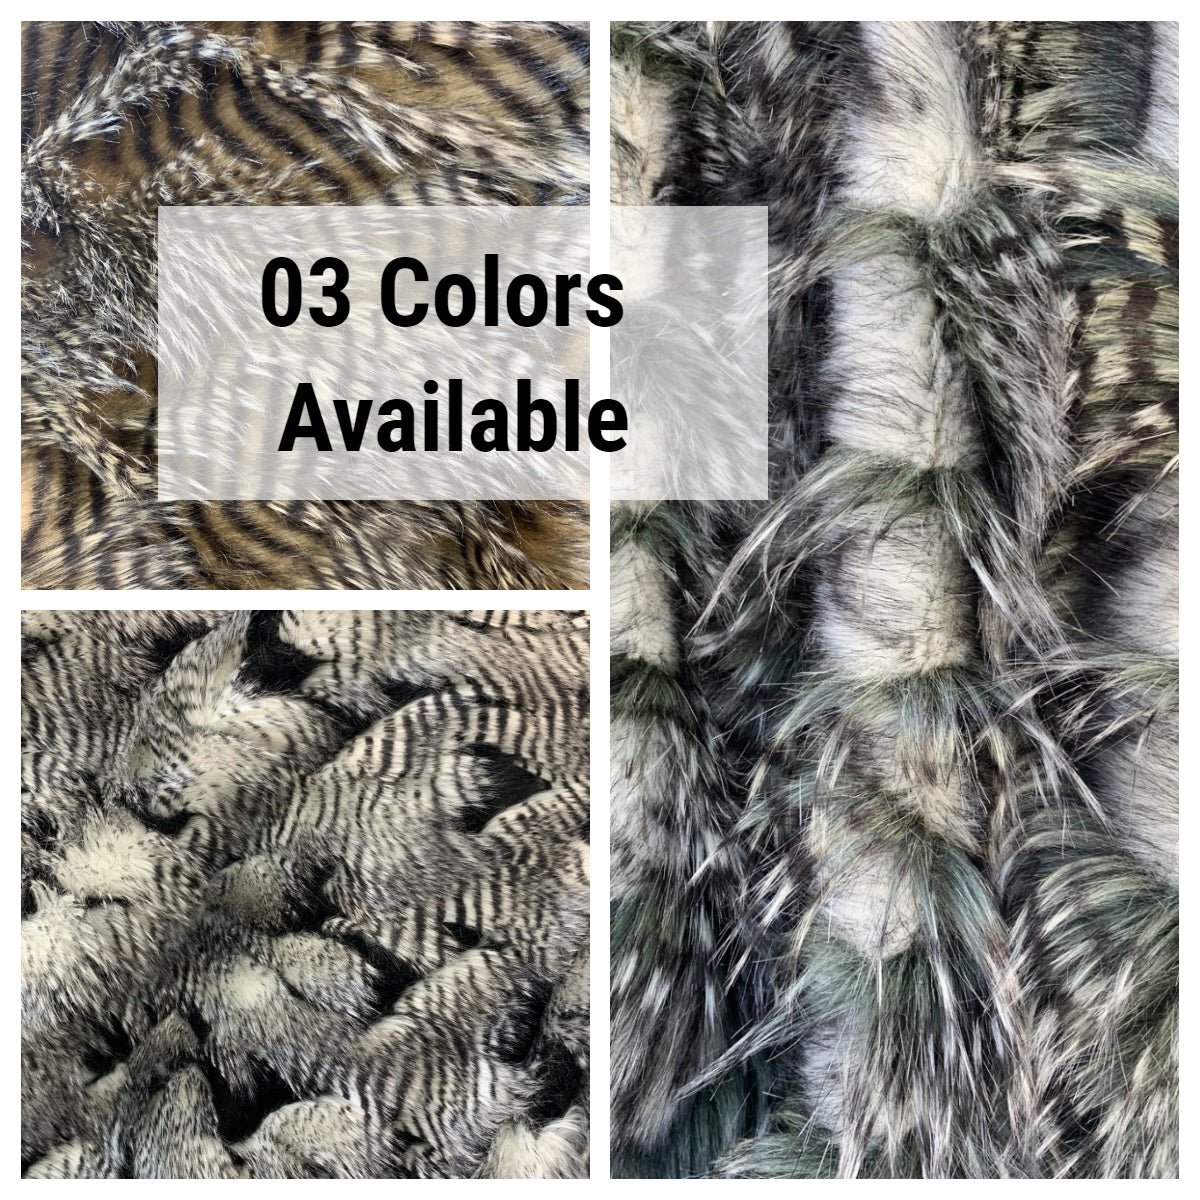 Faux Fake Fur Feathered Bird Long Pile Fabric | Faux Fur MaterialICEFABRICICE FABRICSGrayBy The Yard (60 inches Wide)Faux Fake Fur Feathered Bird Long Pile Fabric | Faux Fur Material ICEFABRIC